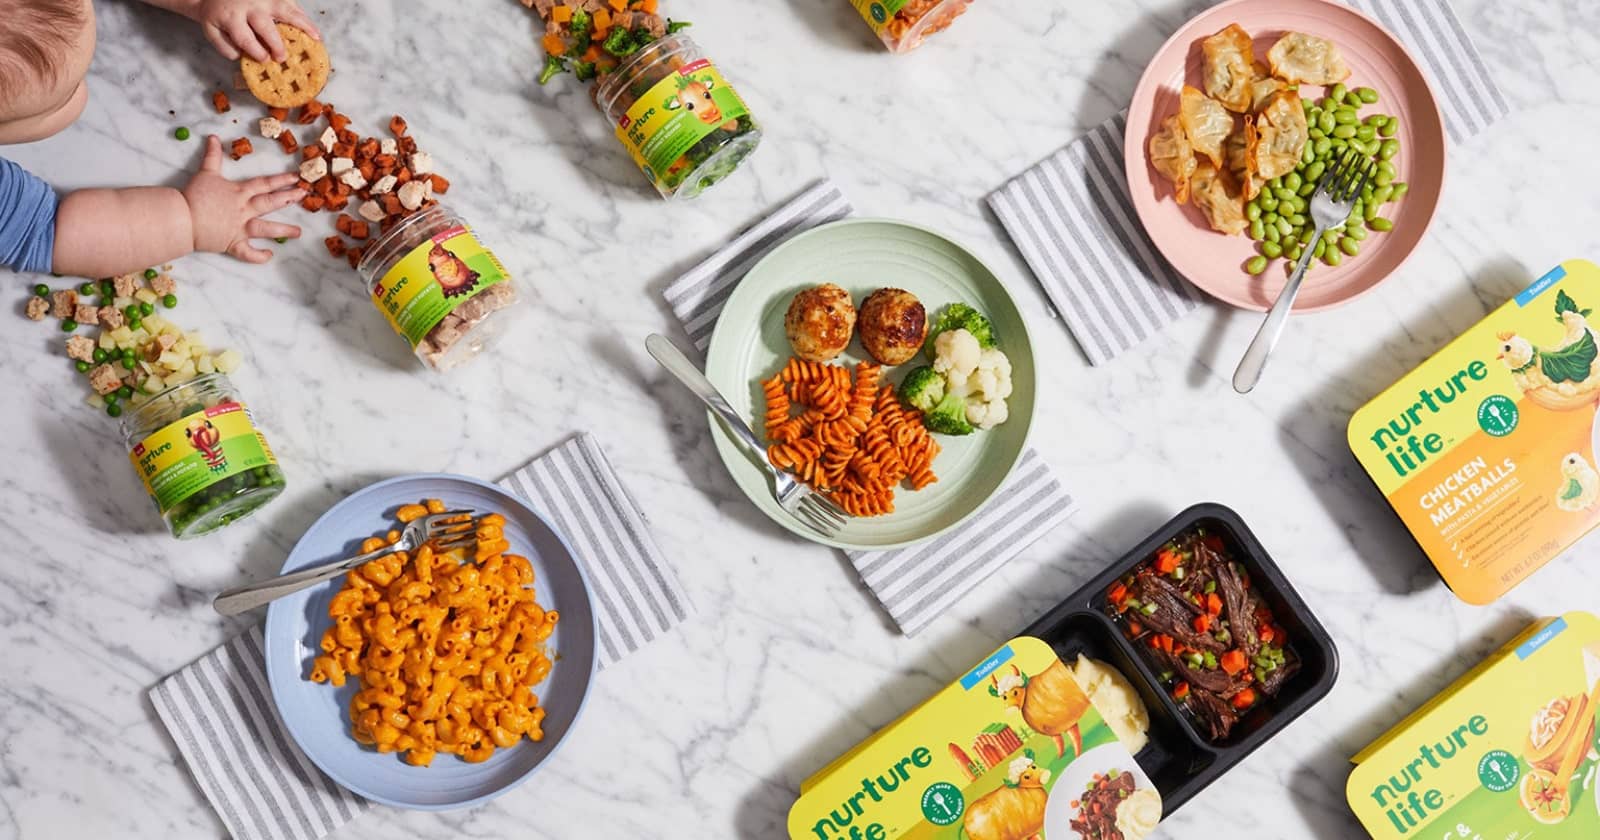 nurture life kids meal subscription - featured image